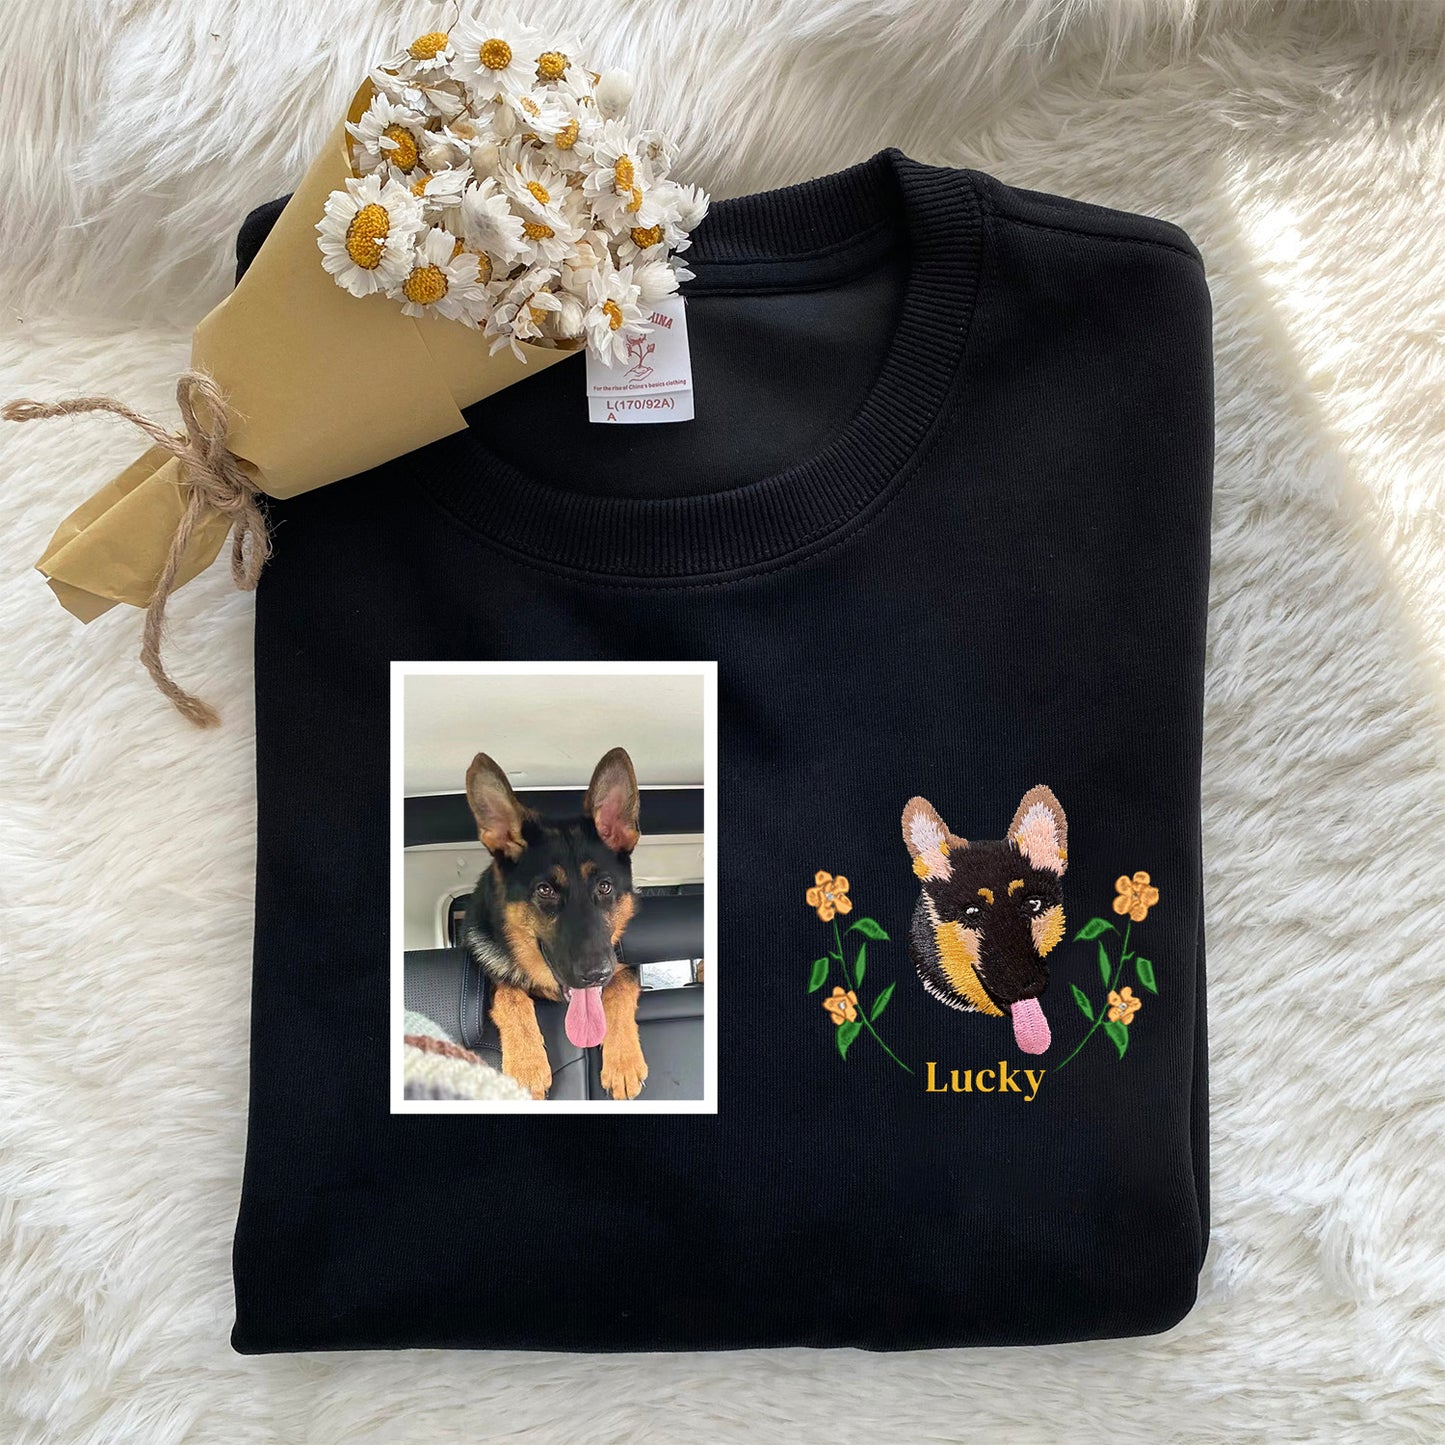 Unique Doggy Designs: Custom Embroidered Apparel（with yellow florets）